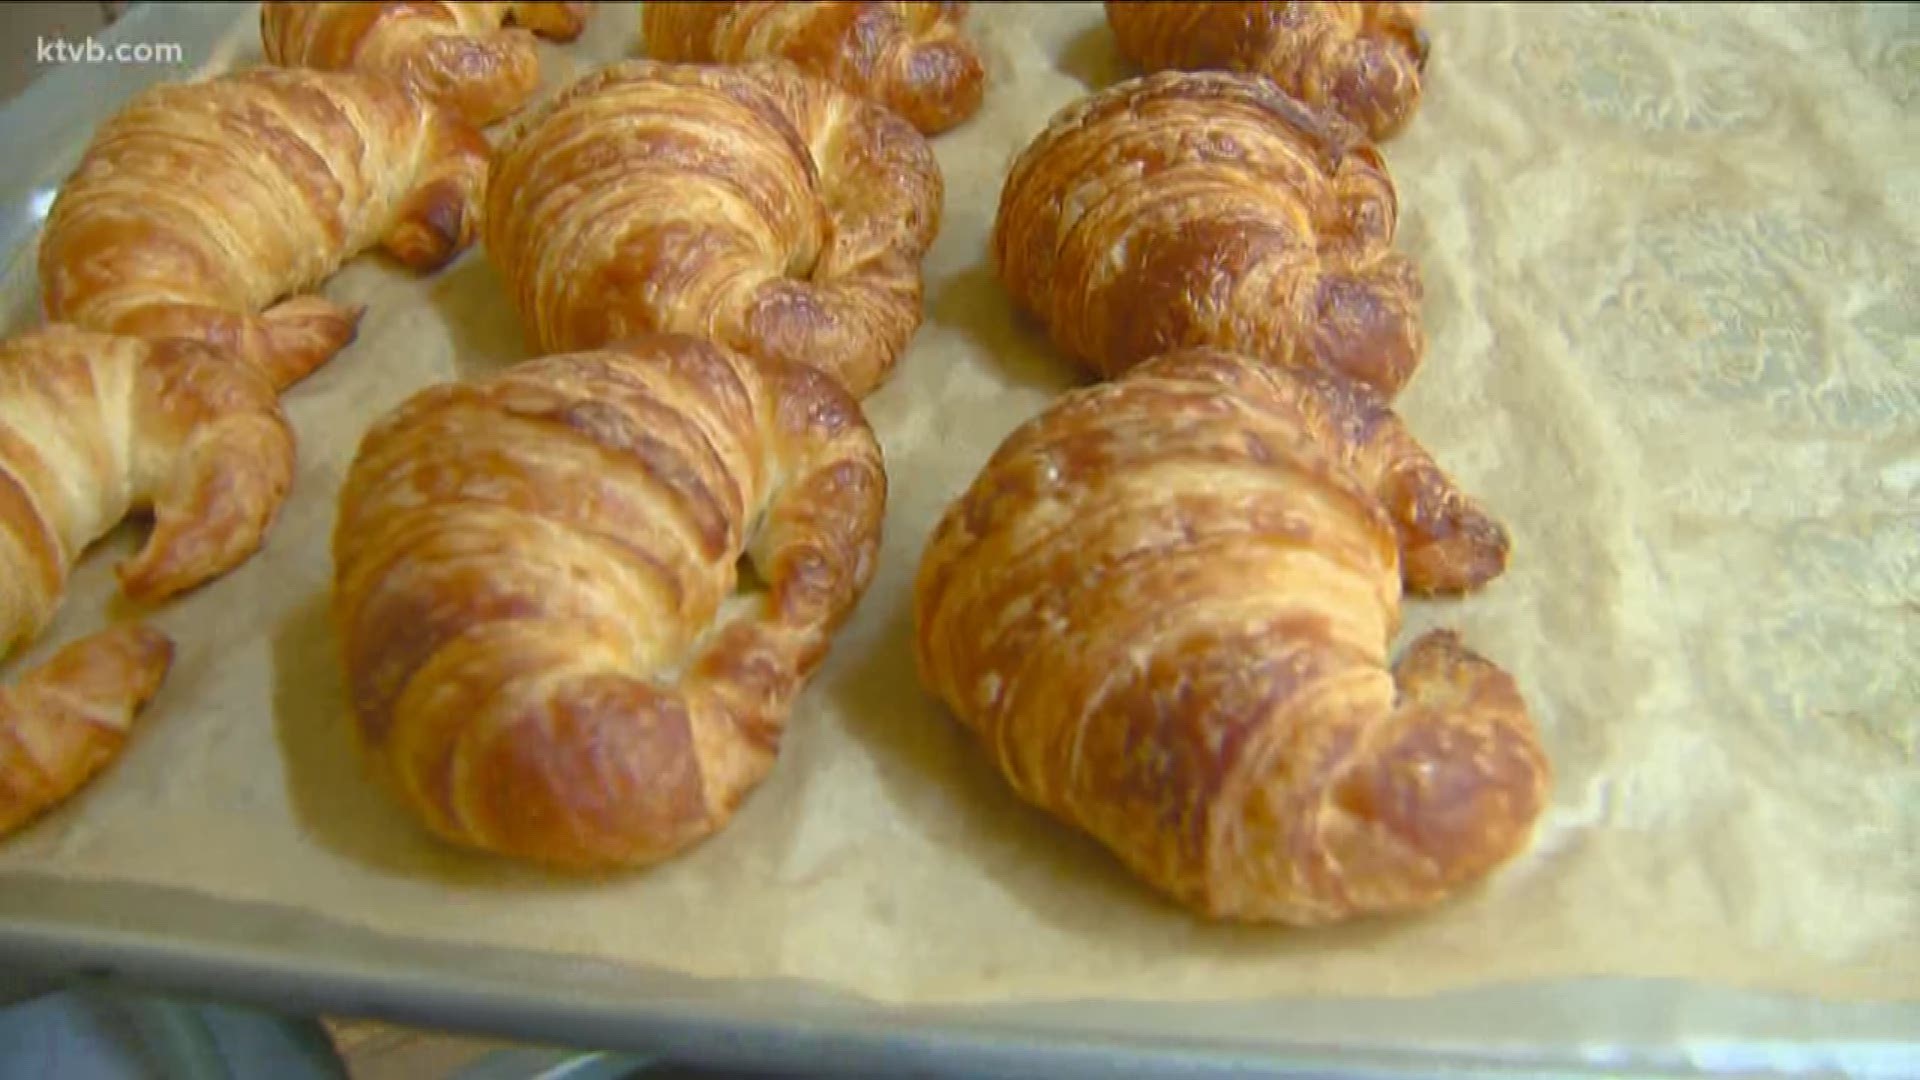 KTVB went to the Boise Bench bakery to find out how they keep it fresh and simple.